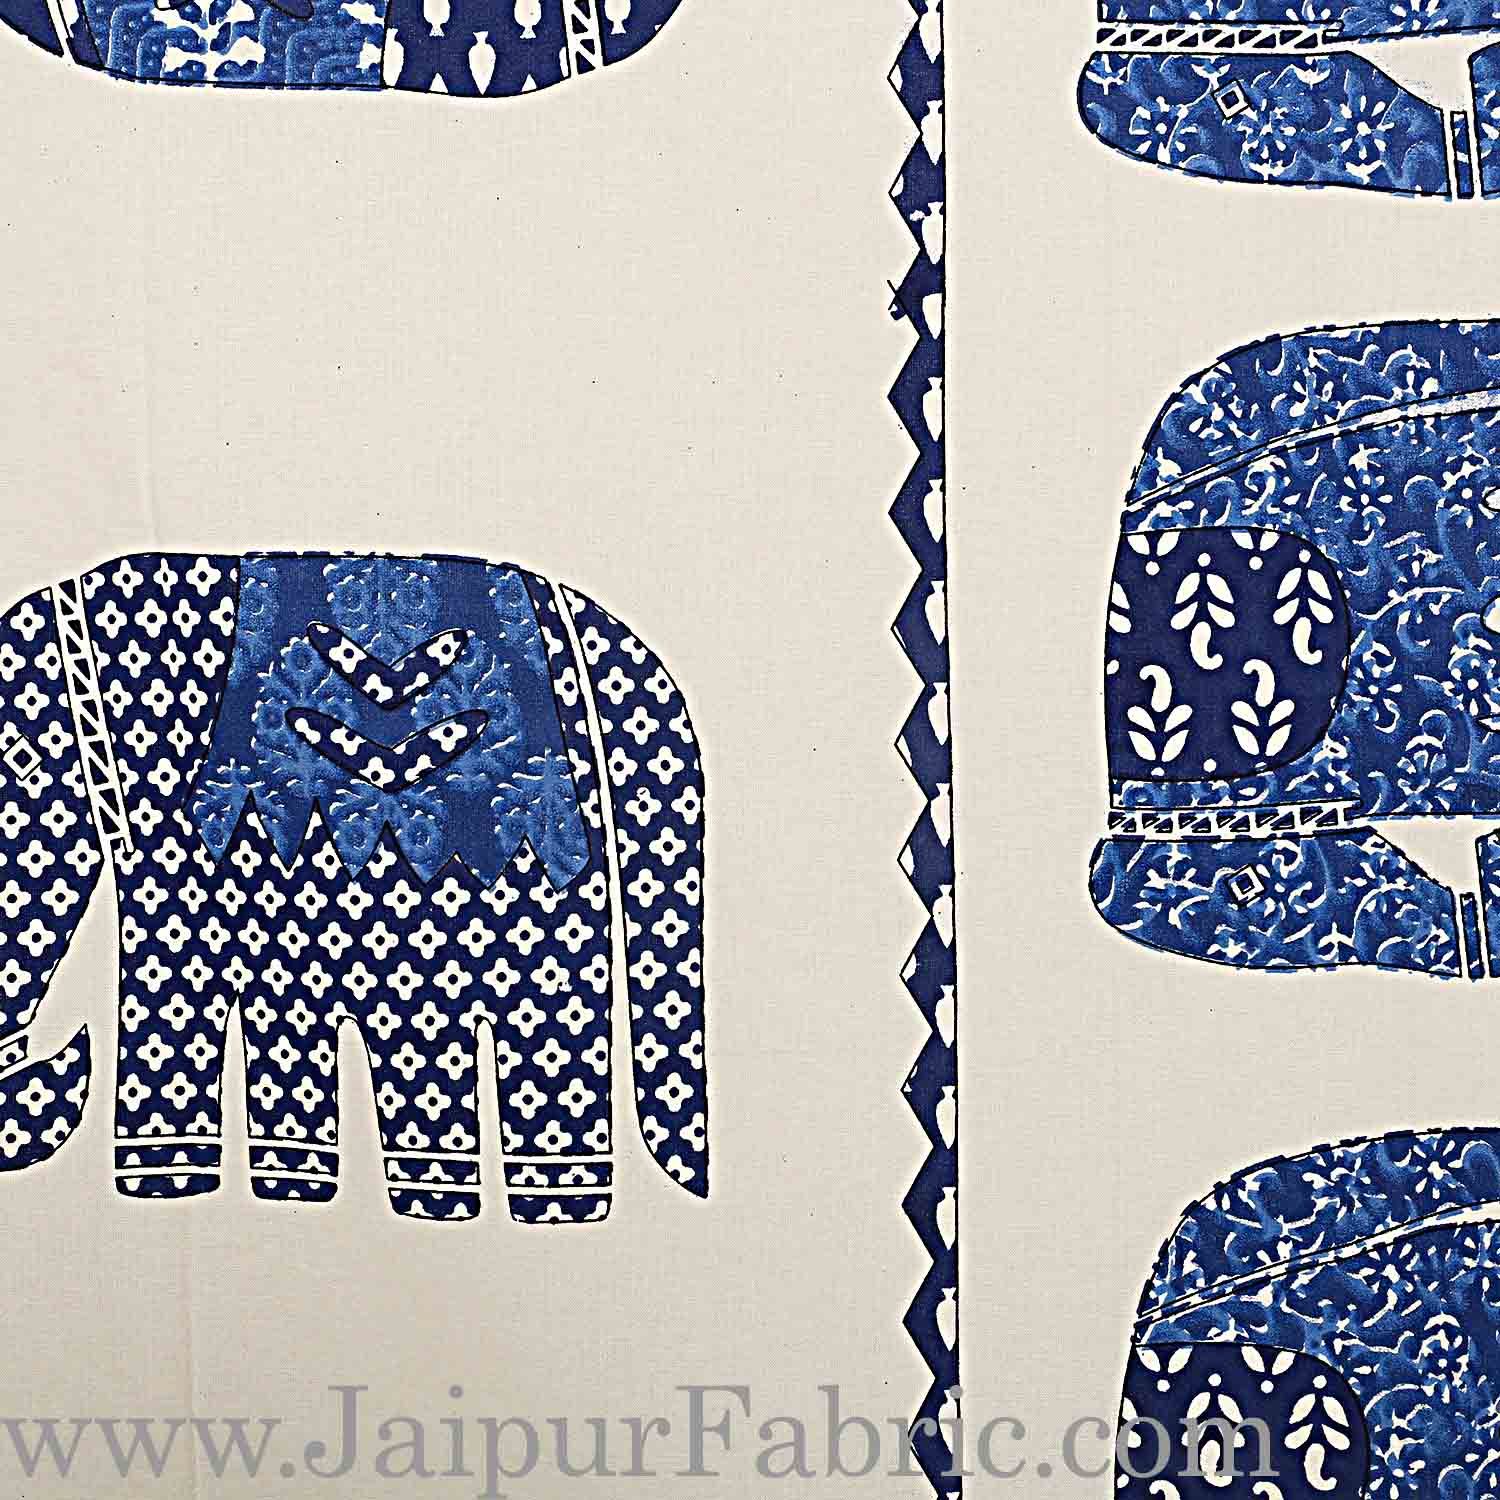 Double Bed Sheet Blue Color Elephant Print With Two Pillow Cover